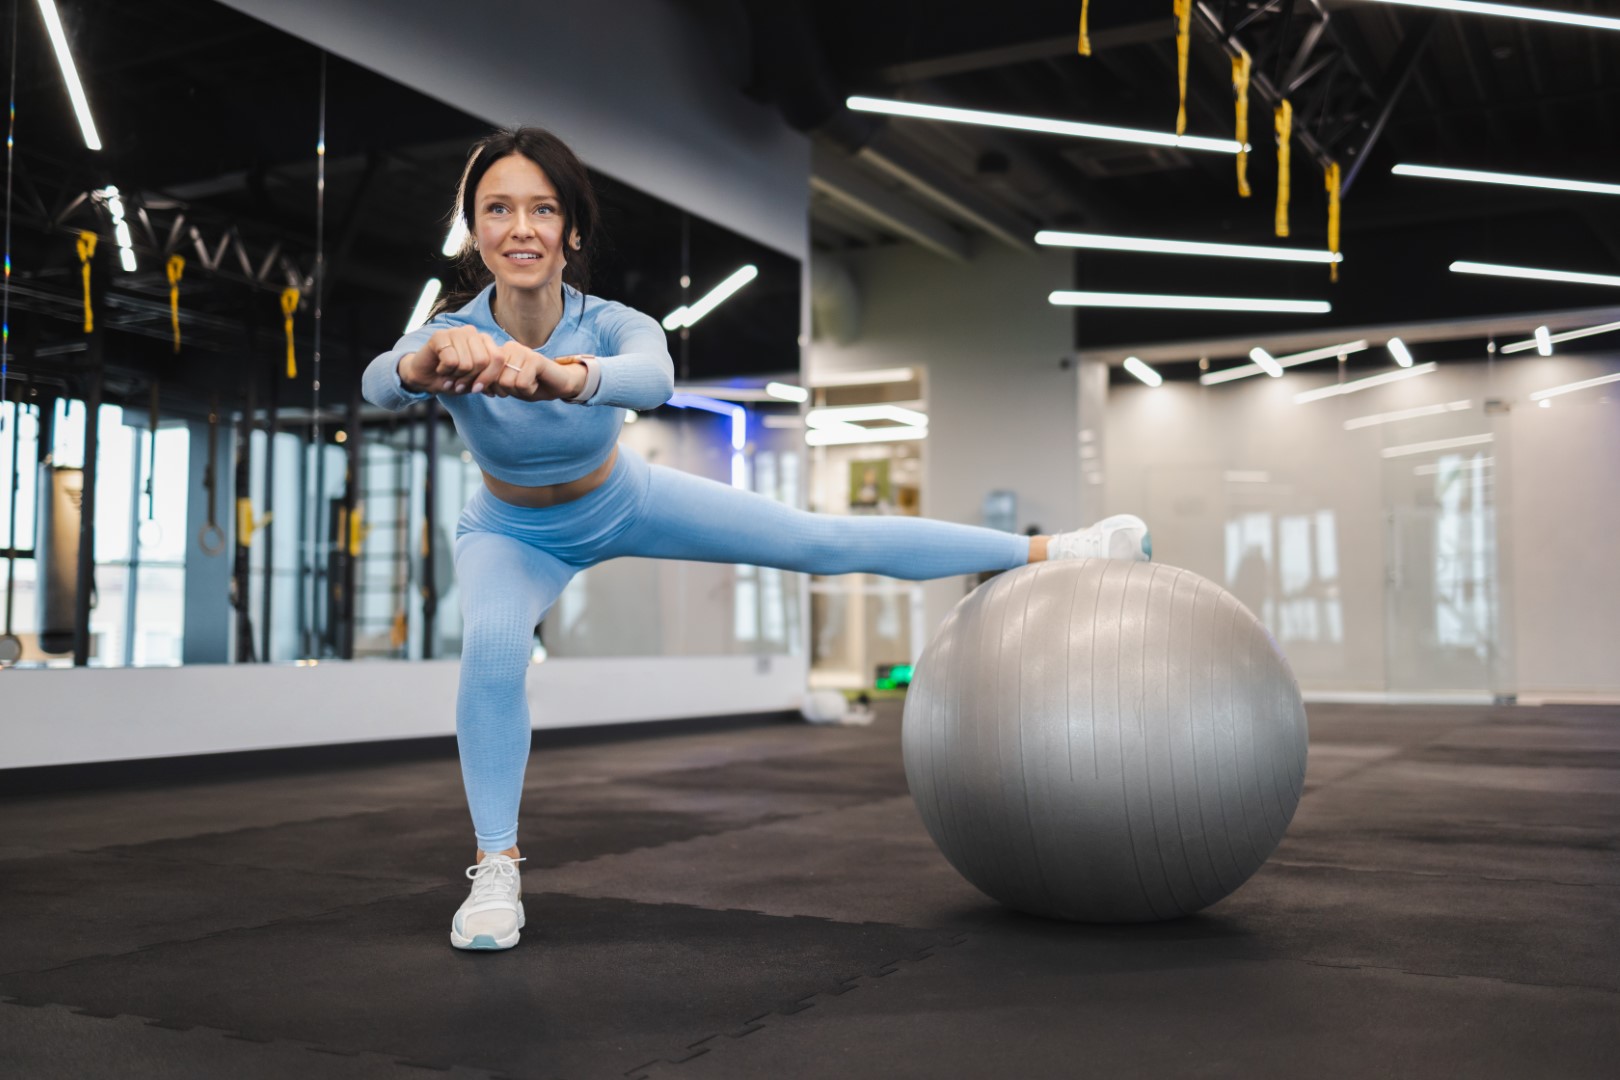 Cheerful woman working out with a fitness ball in the gym